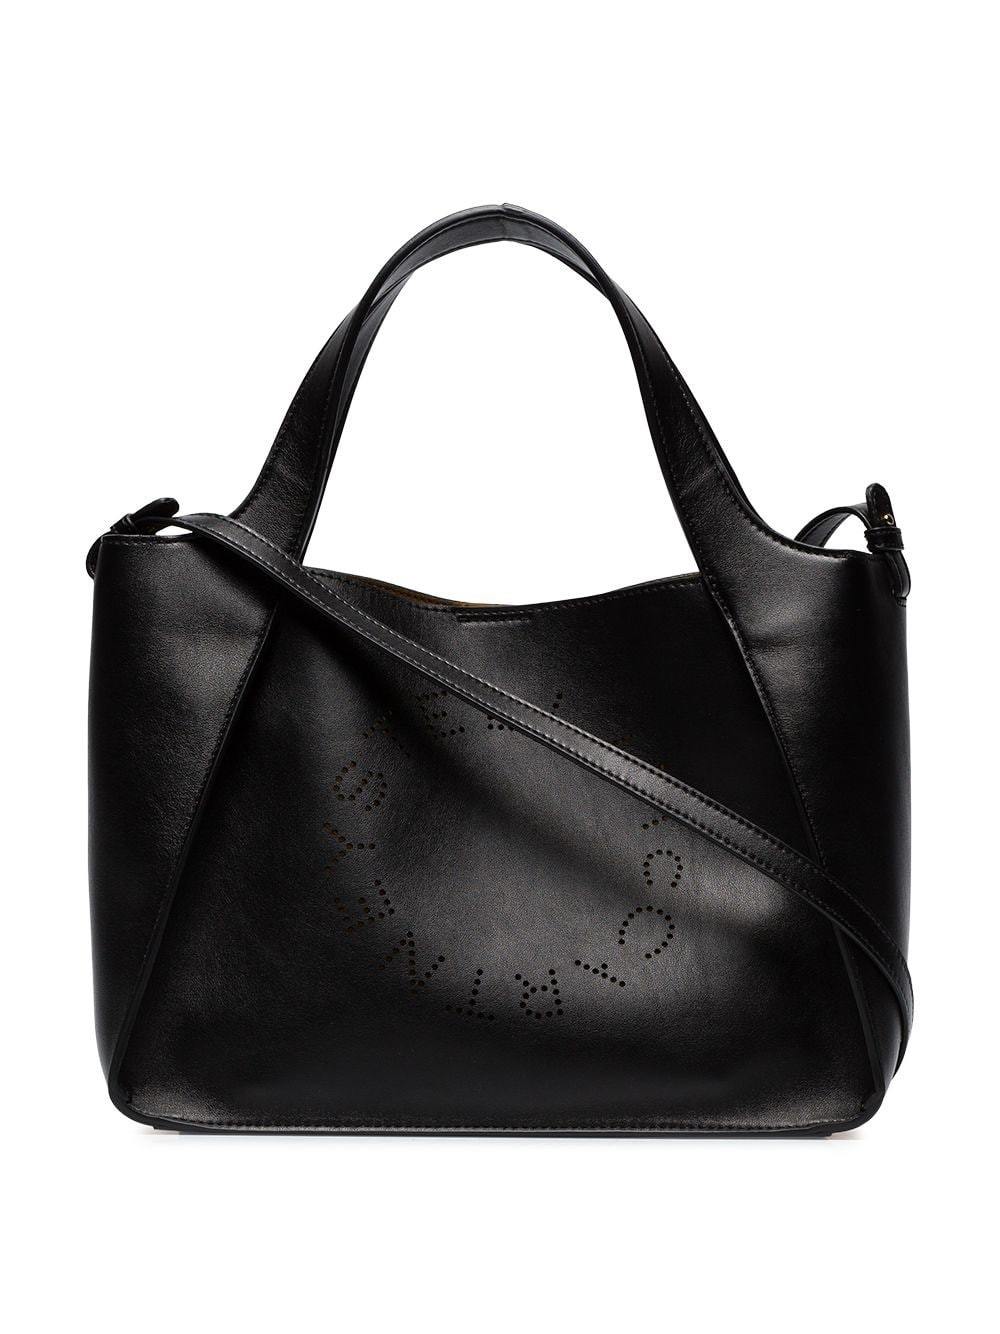 stella mccartney LOGO BAG WITH STRAP available on montiboutique.com - 26924